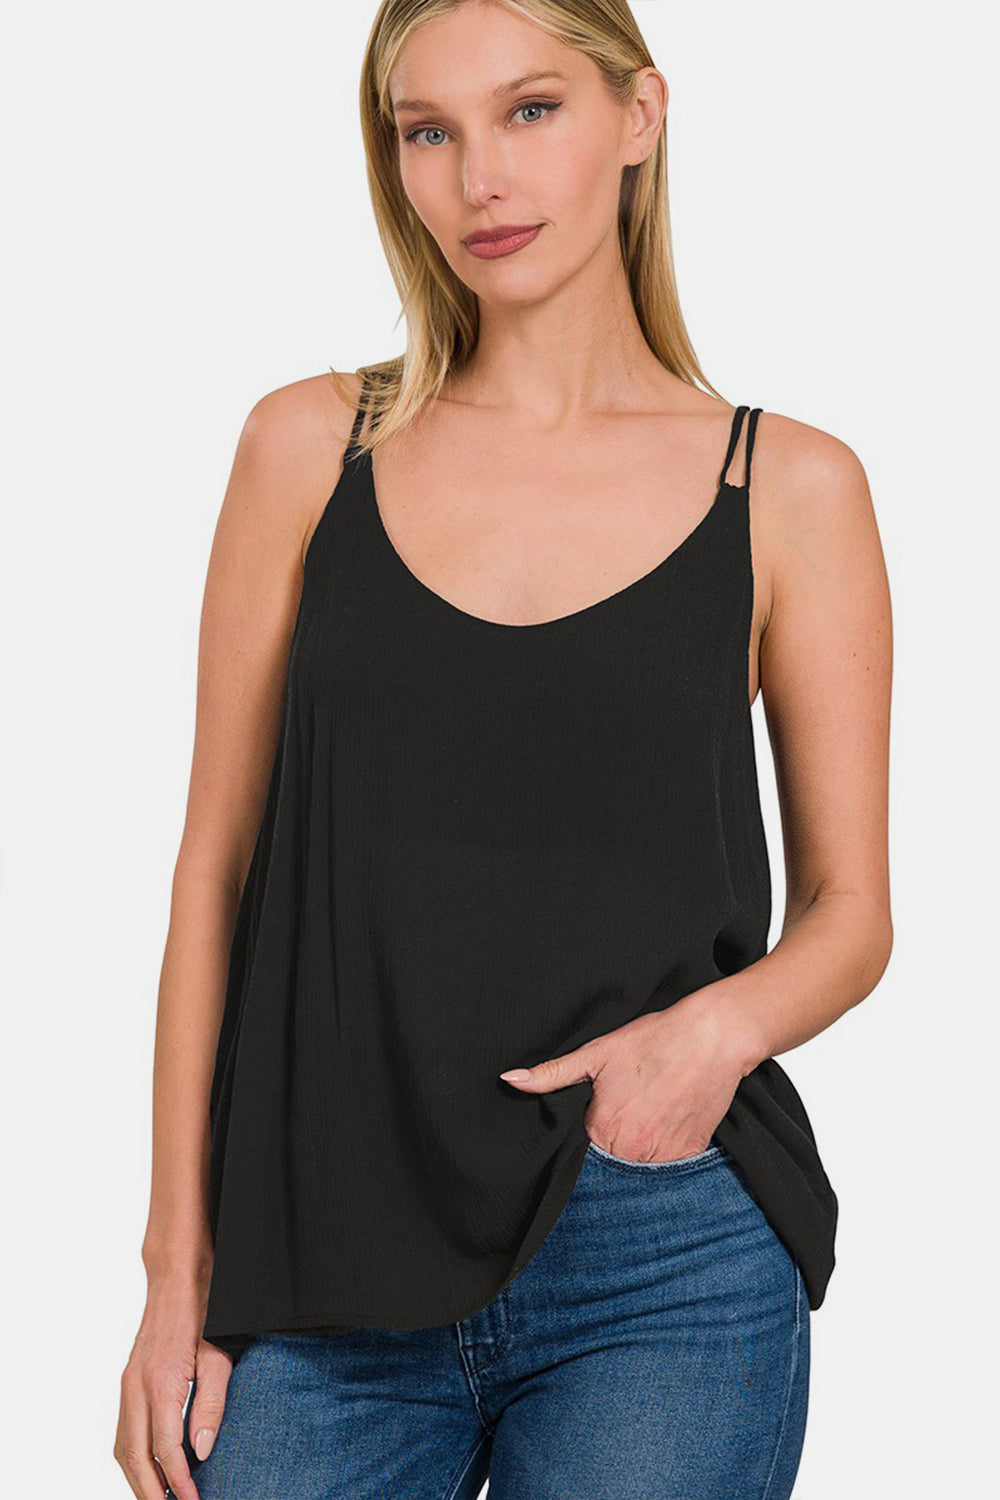 The Woven Double Spaghetti Strap V-Neck Cami is a stylish and versatile top that is perfect for layering or wearing on its own. The double spaghetti straps add a touch of sophistication and detail to the V-neckline. Made from woven fabric, this cami drapes beautifully and feels luxurious against the skin.  S  - L